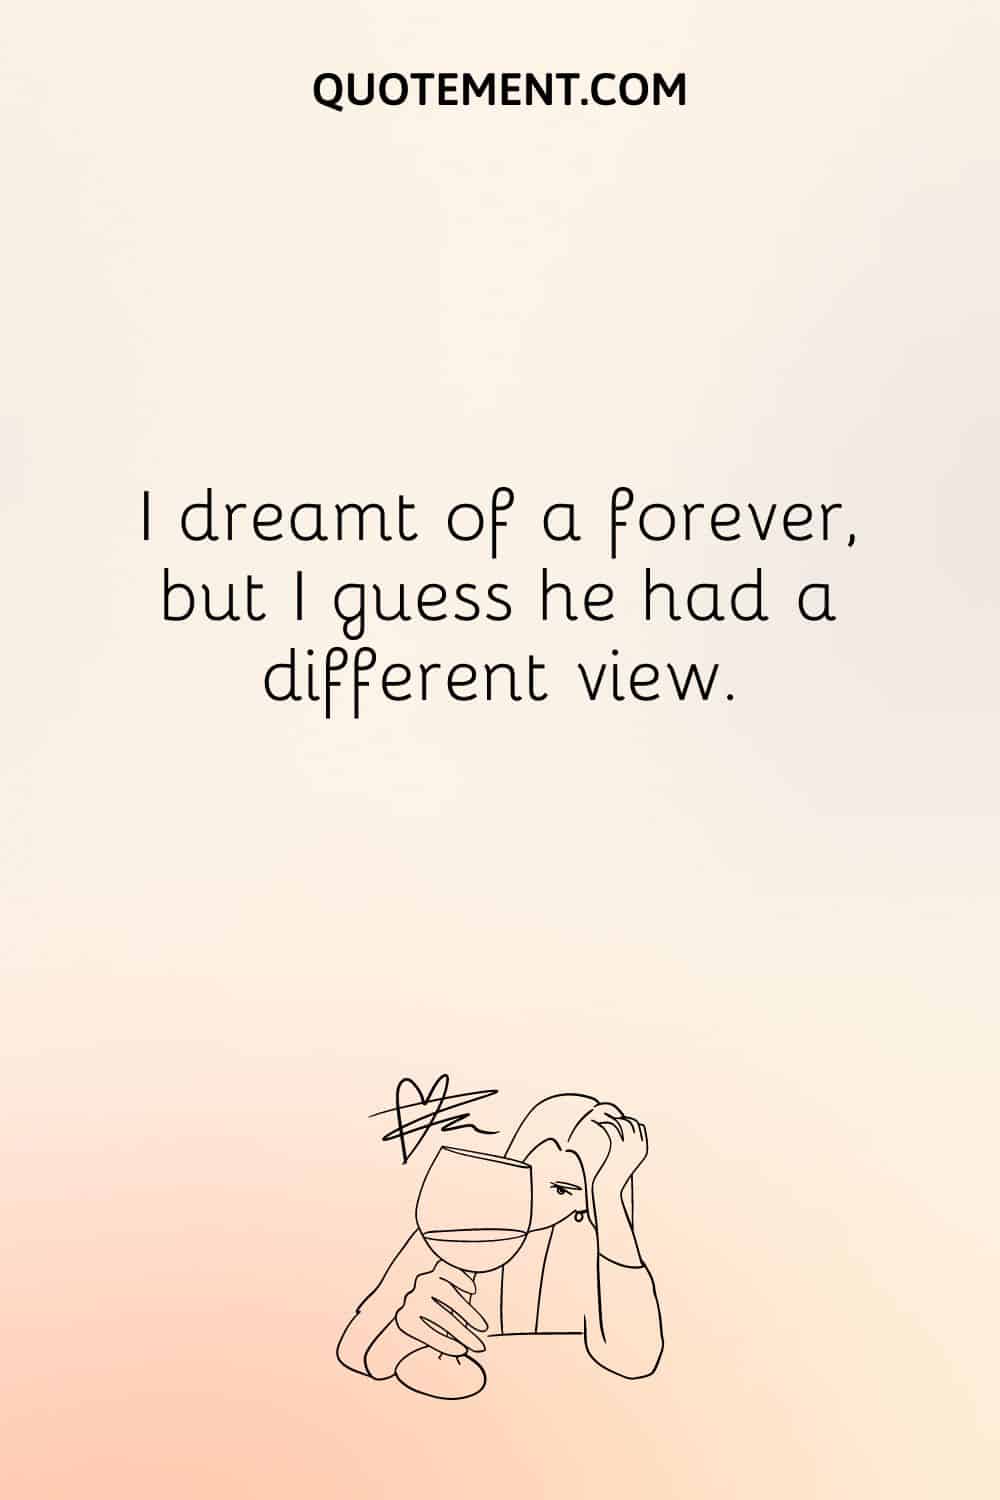  I dreamt of a forever, but I guess he had a different view.